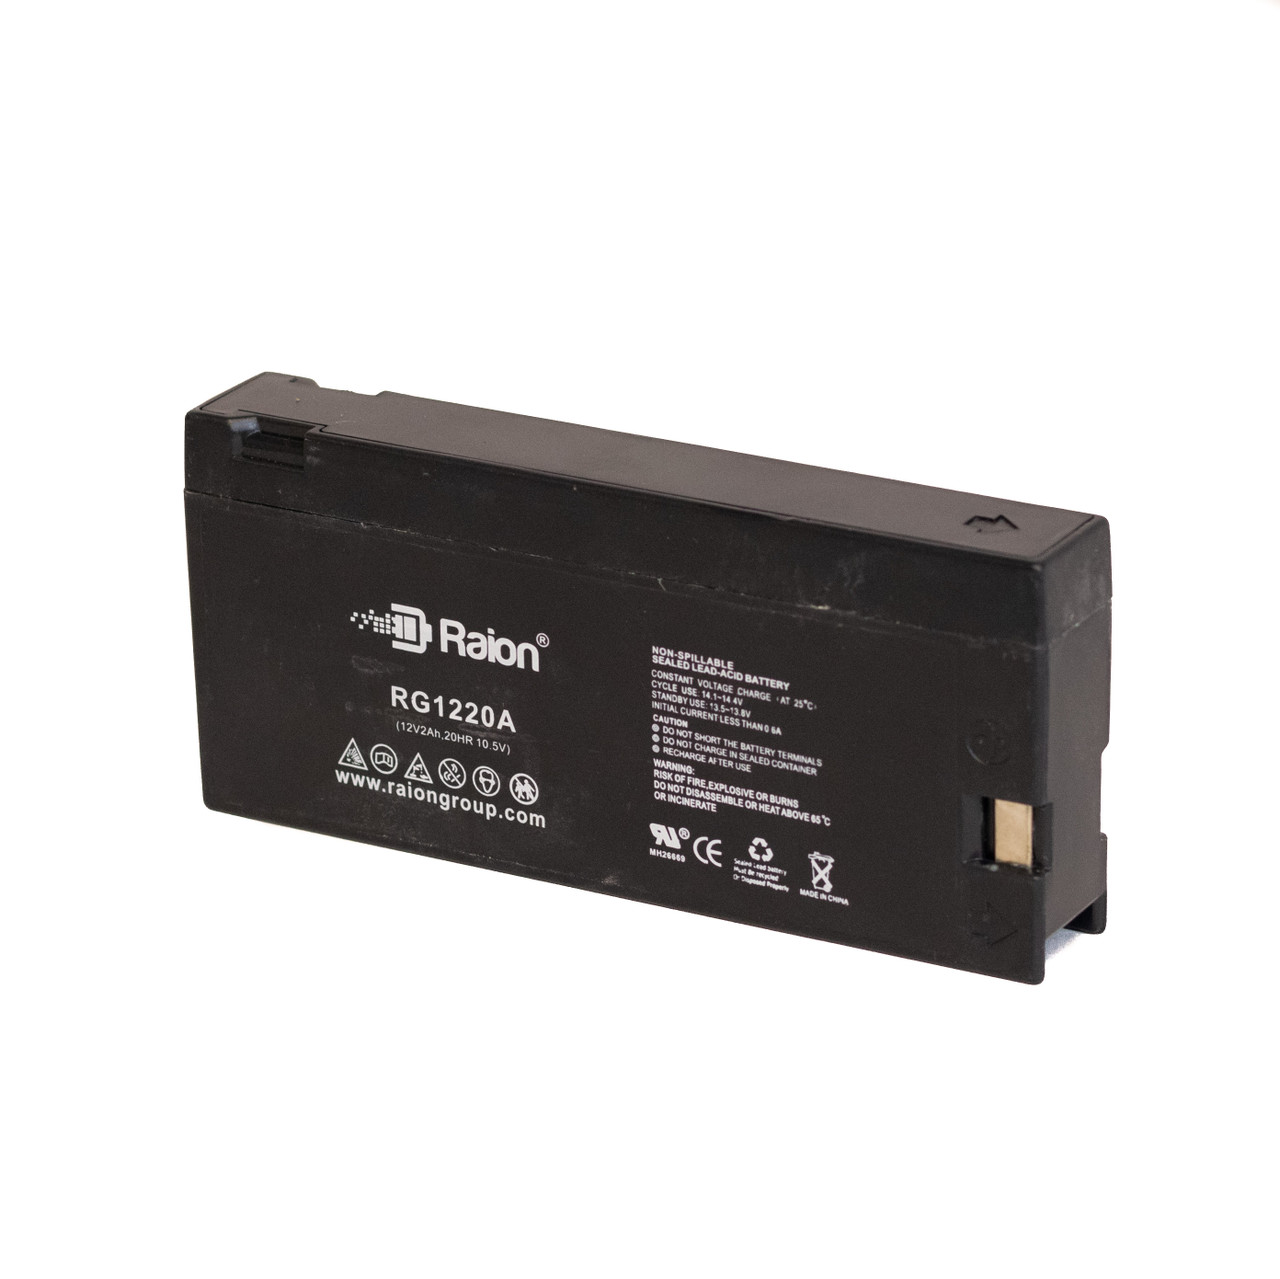 Raion Power RG1220A Replacement Battery for Panasonic OmniMovie VHS AFX8